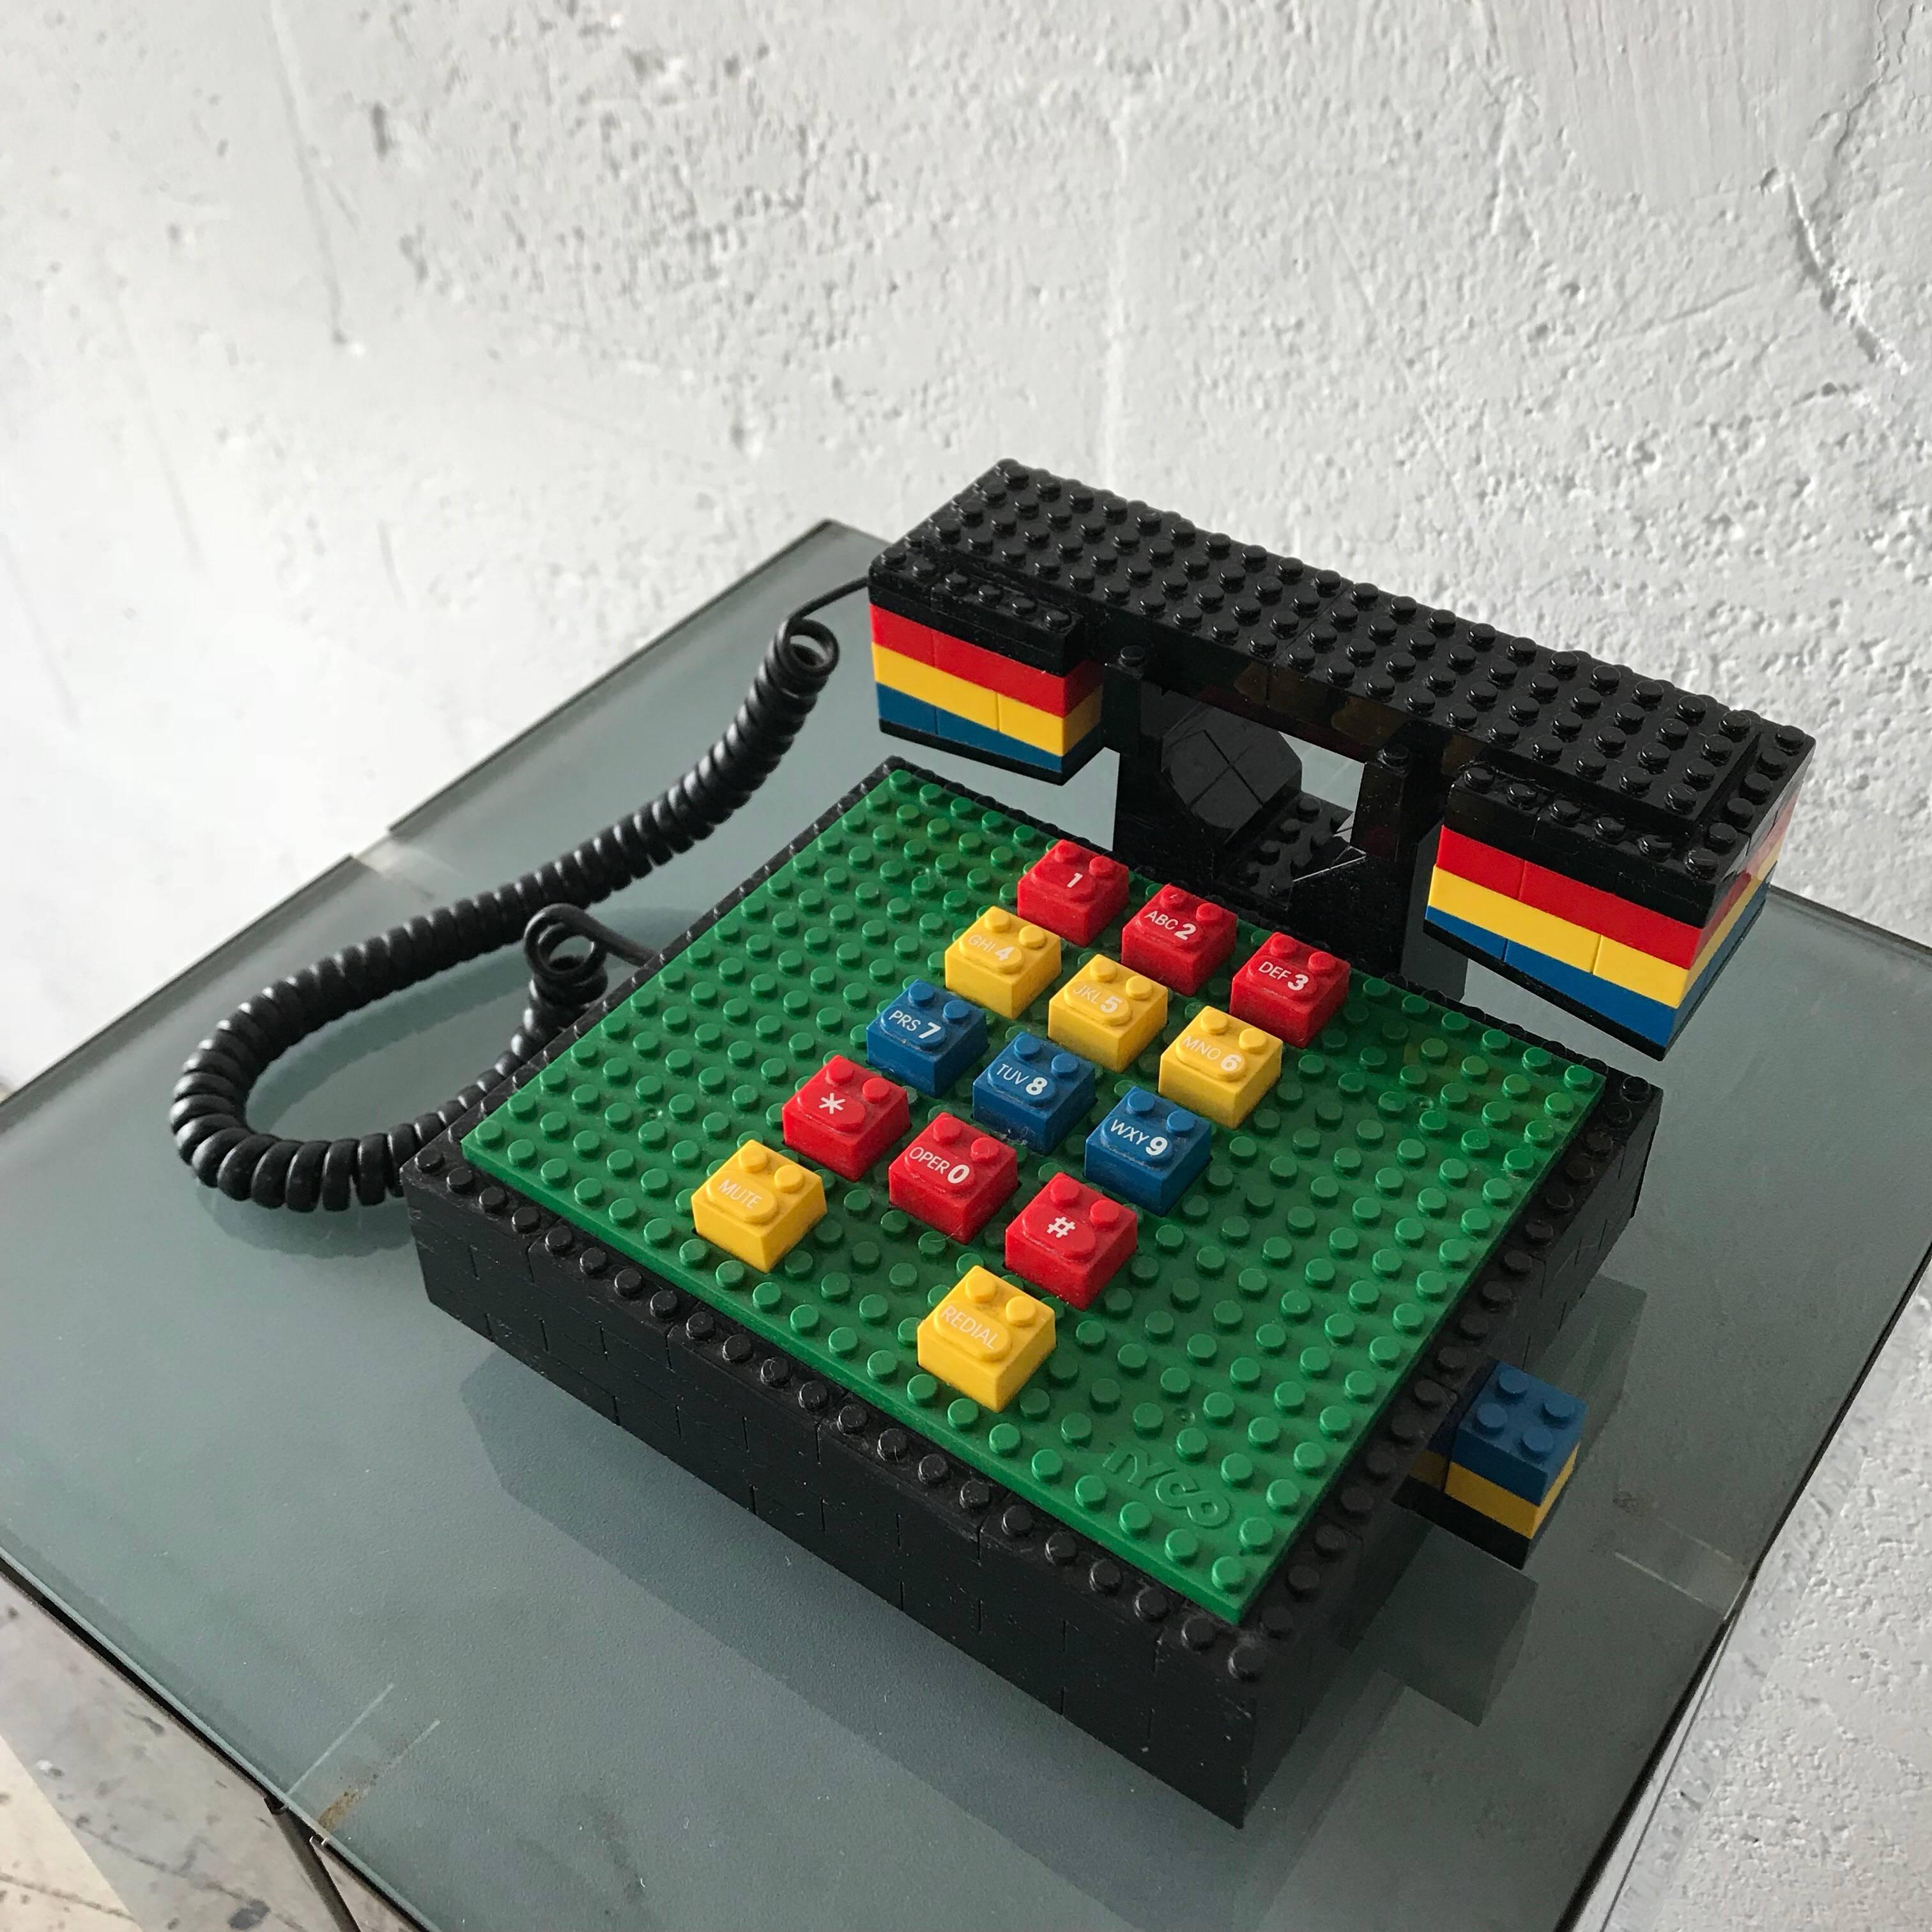 Iconic LEGO telephone rendered in multicolored LEGO's by Tyco.